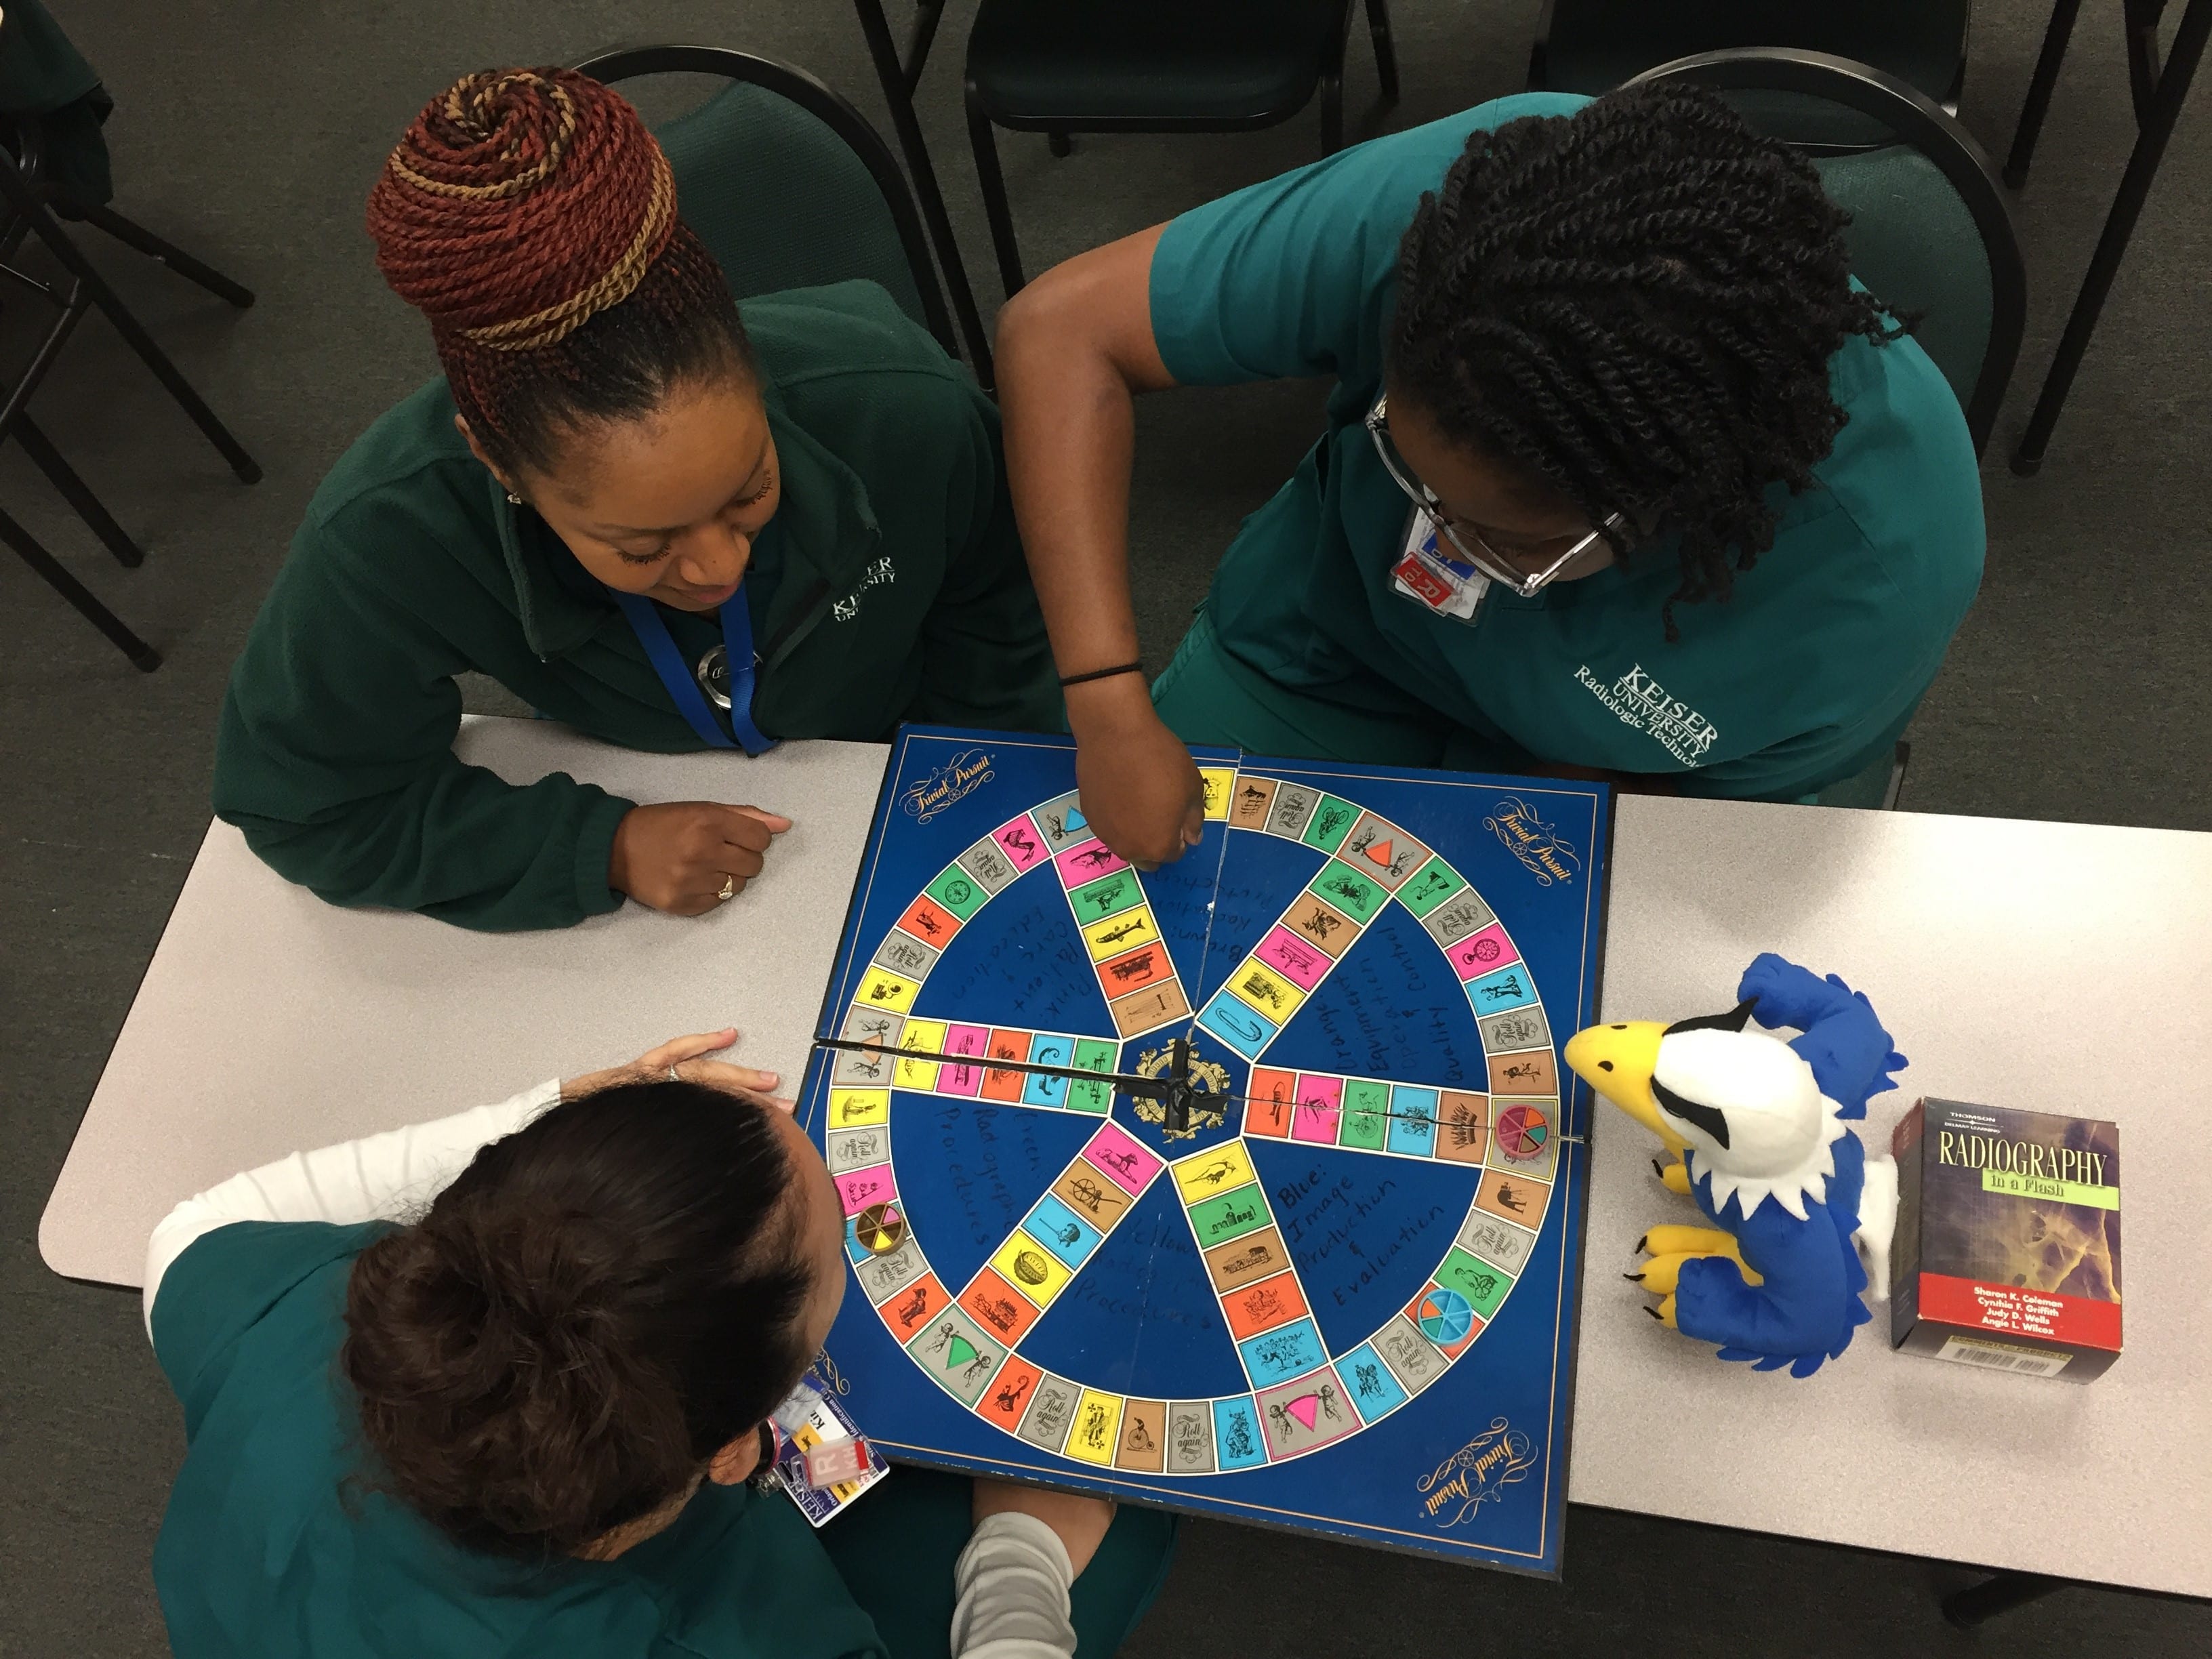 Orlando RT Students Play Radiography Trivial Pursuit